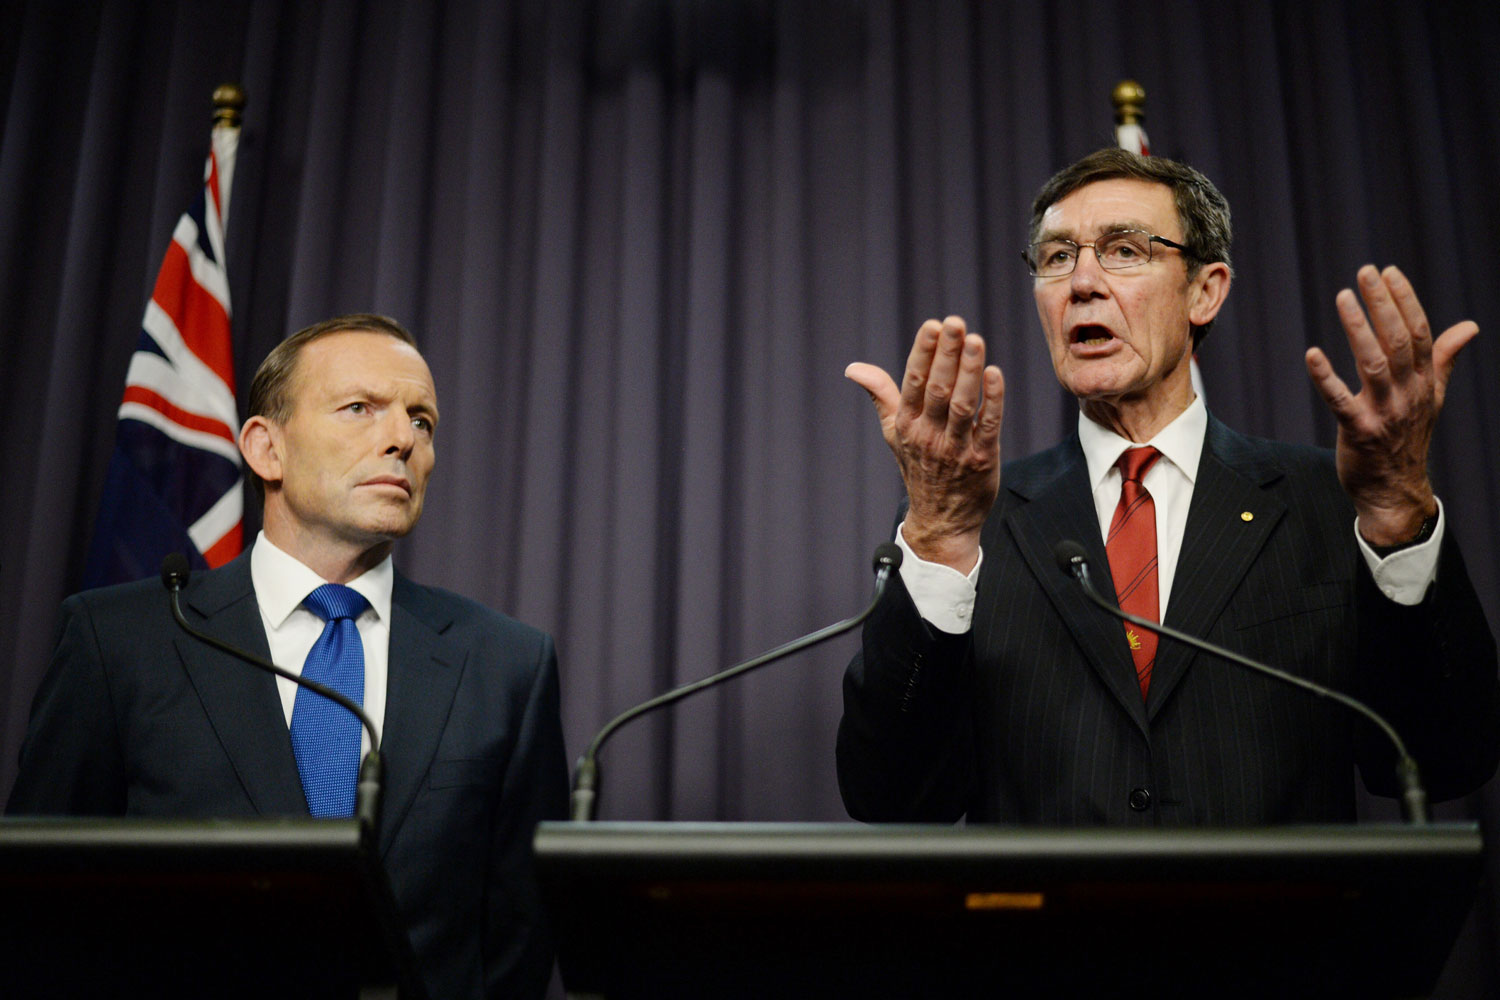 From left: Prime Minister Tony Abbott listens as Angus Houston, in charge of joint search efforts, speaks to the media during a press conference at Parliament House in Canberra on April 28, 2014. (Lukas Coch—AAP/AP)